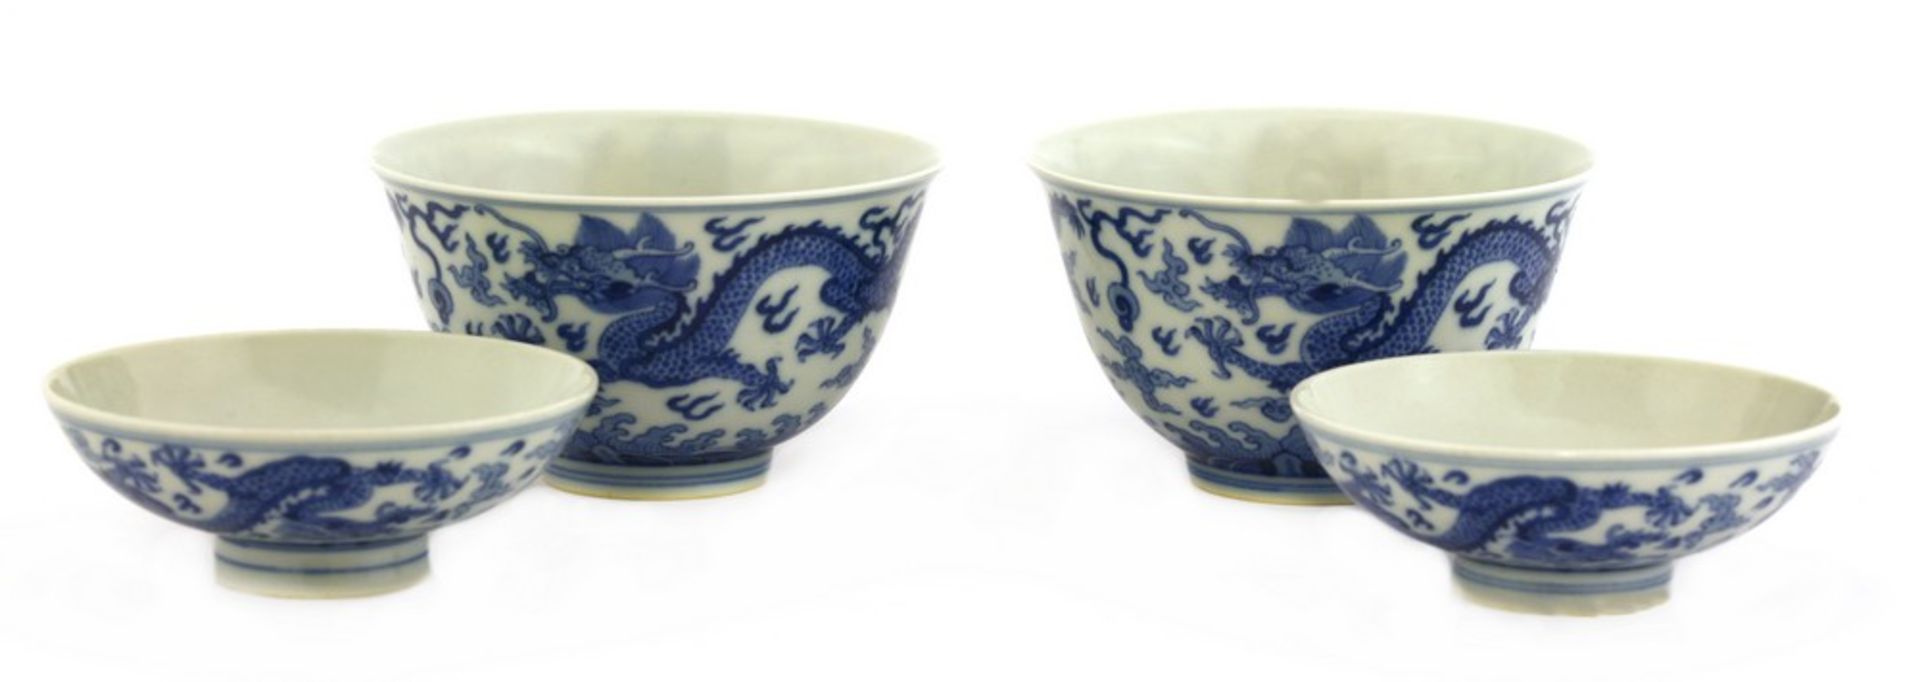 A pair of Chinese blue and white bowls and covers - Image 4 of 4